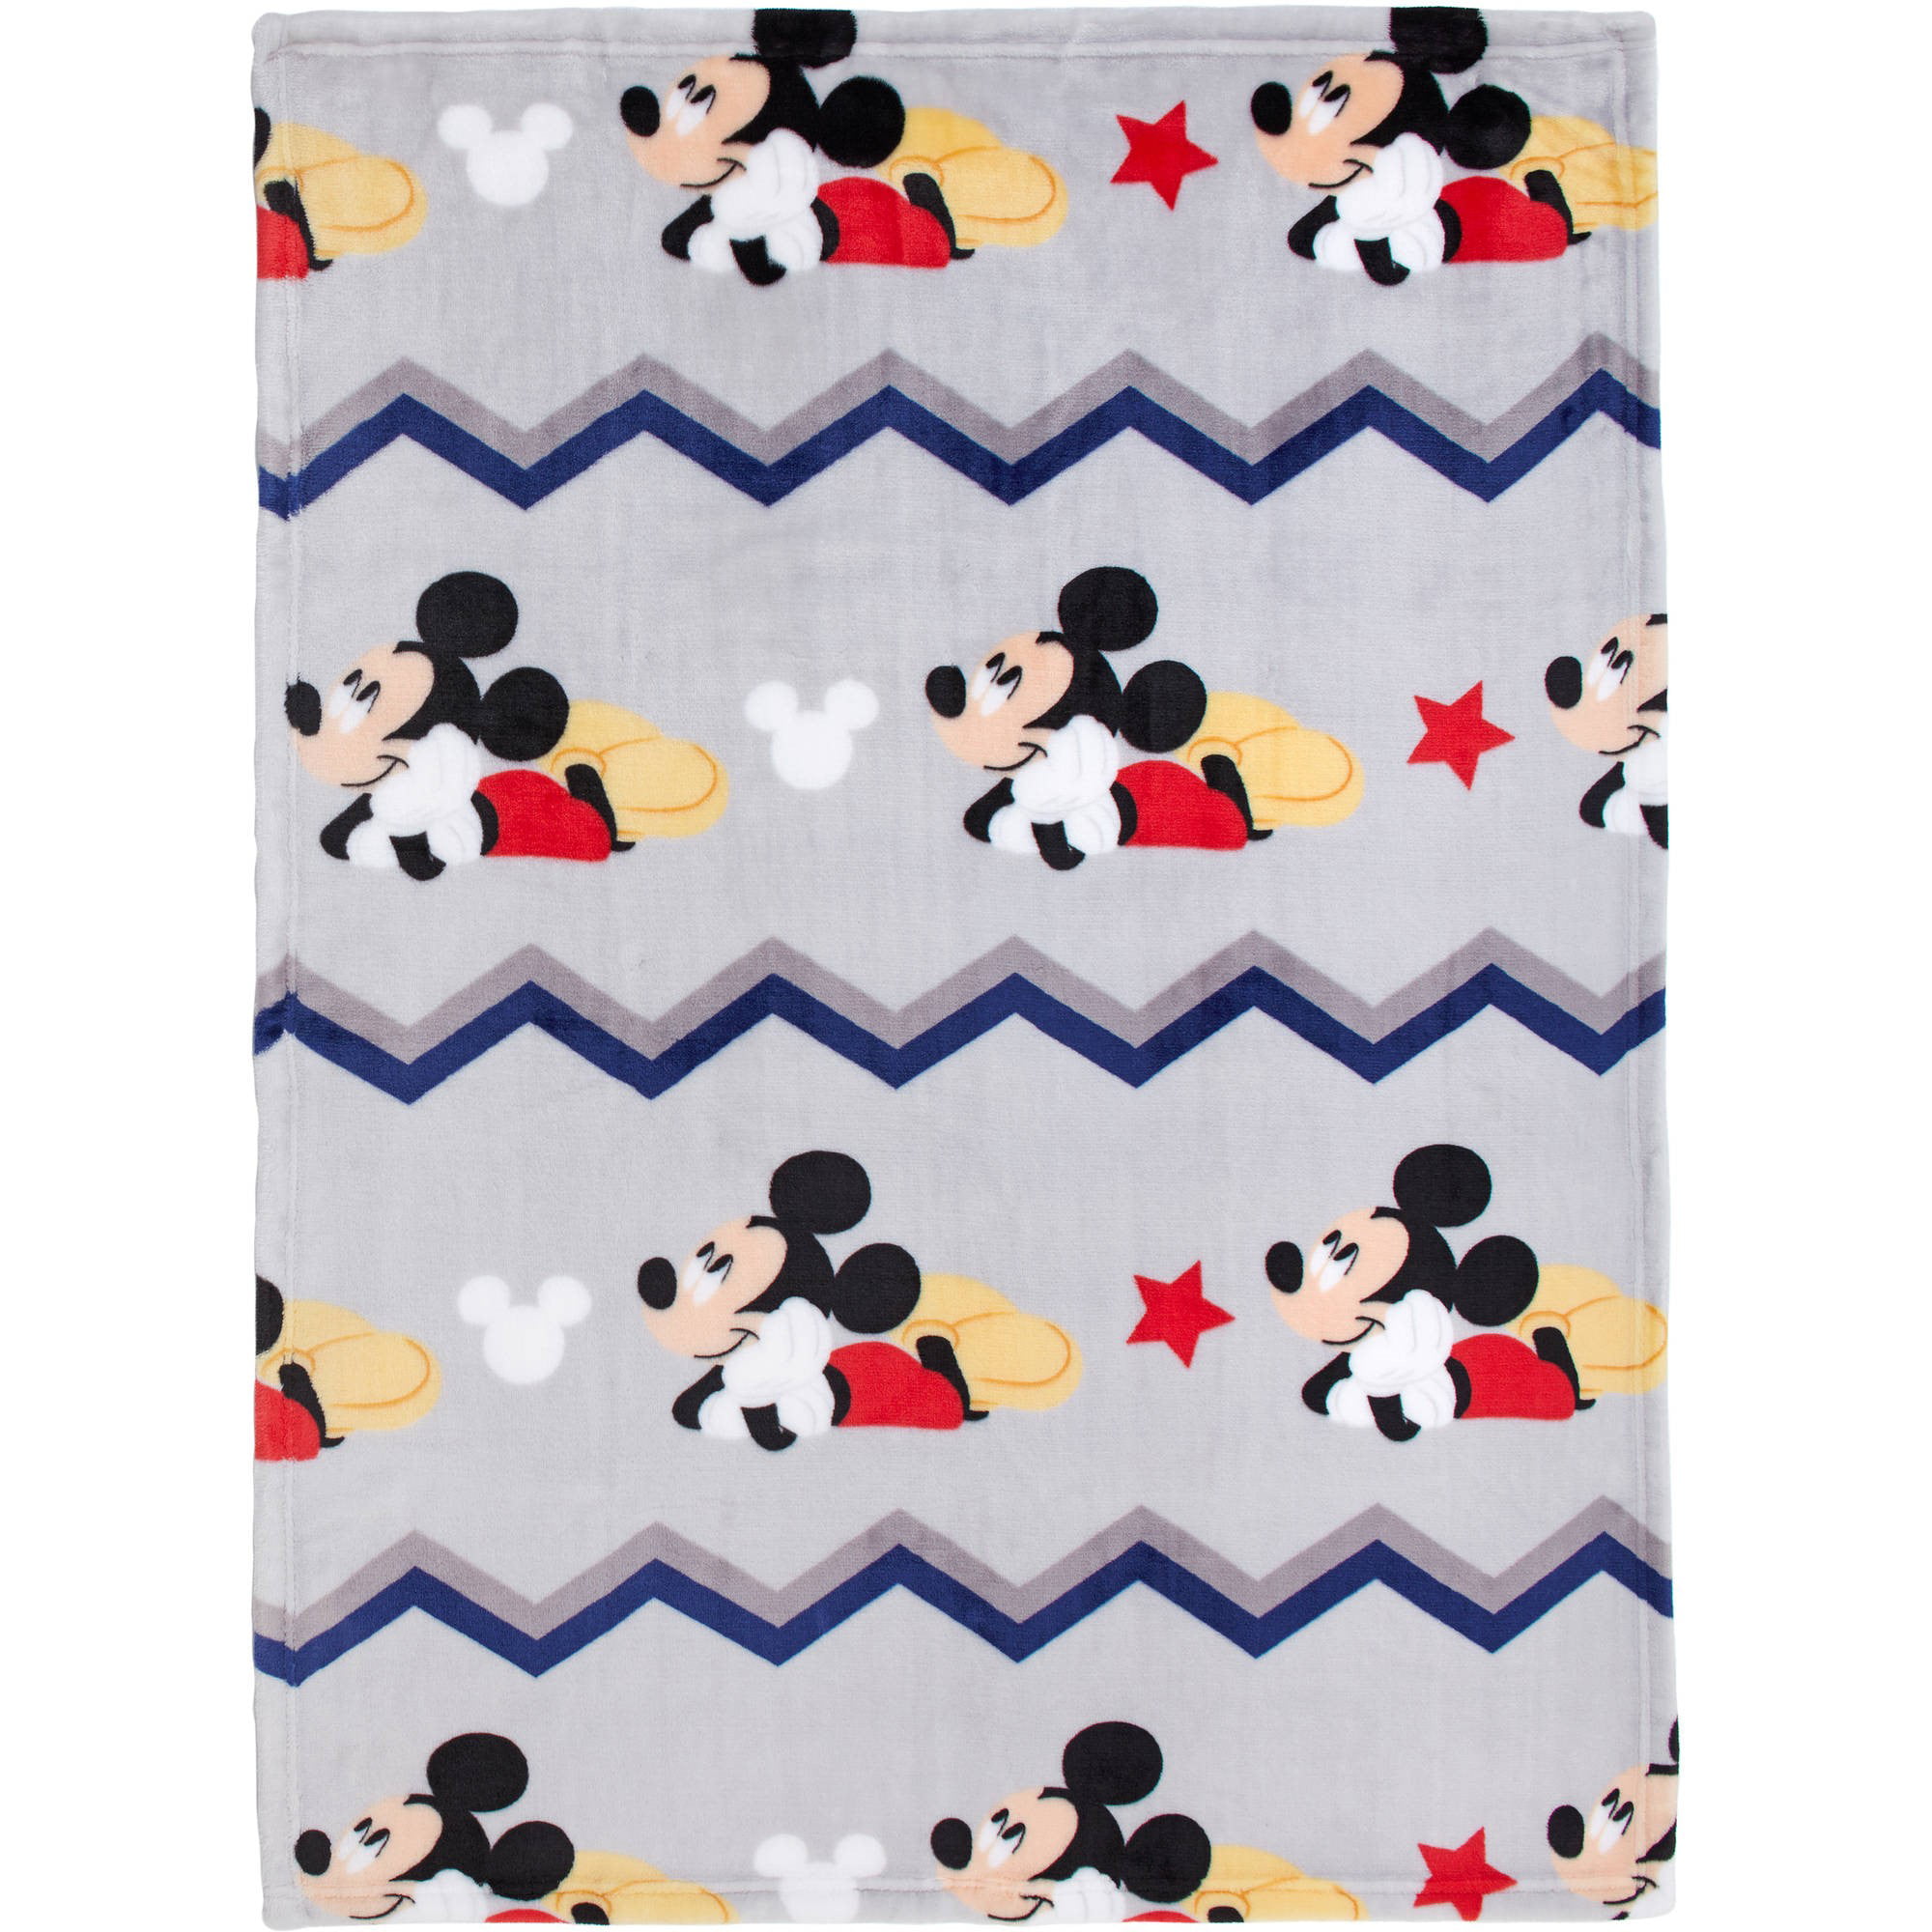 Mickey Mouse Squares Fleece Blanket 